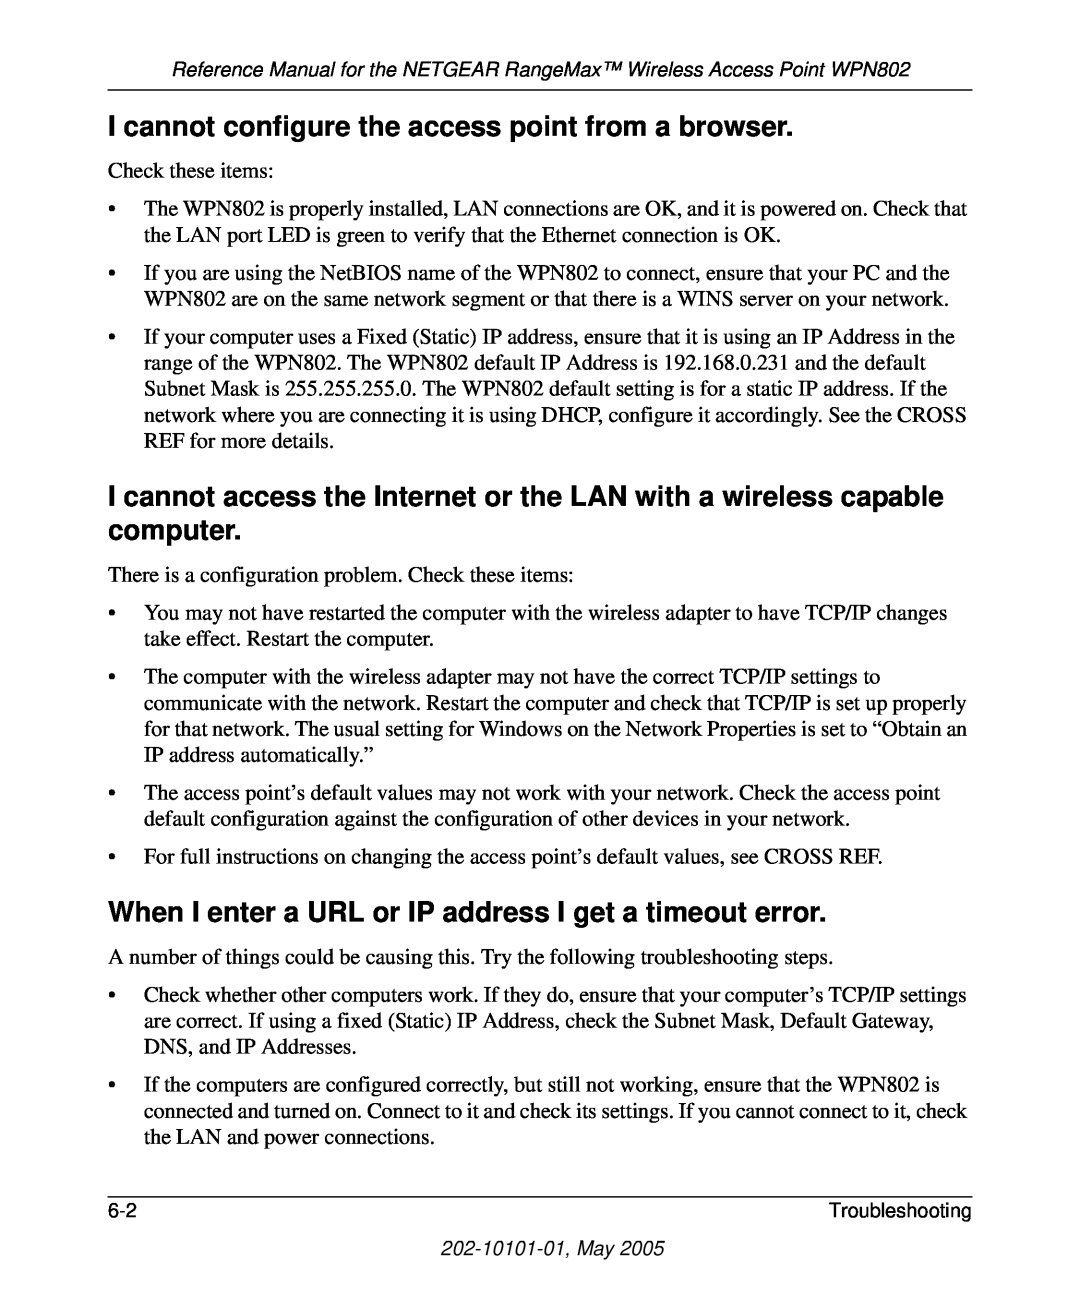 NETGEAR WPN802 I cannot configure the access point from a browser, When I enter a URL or IP address I get a timeout error 